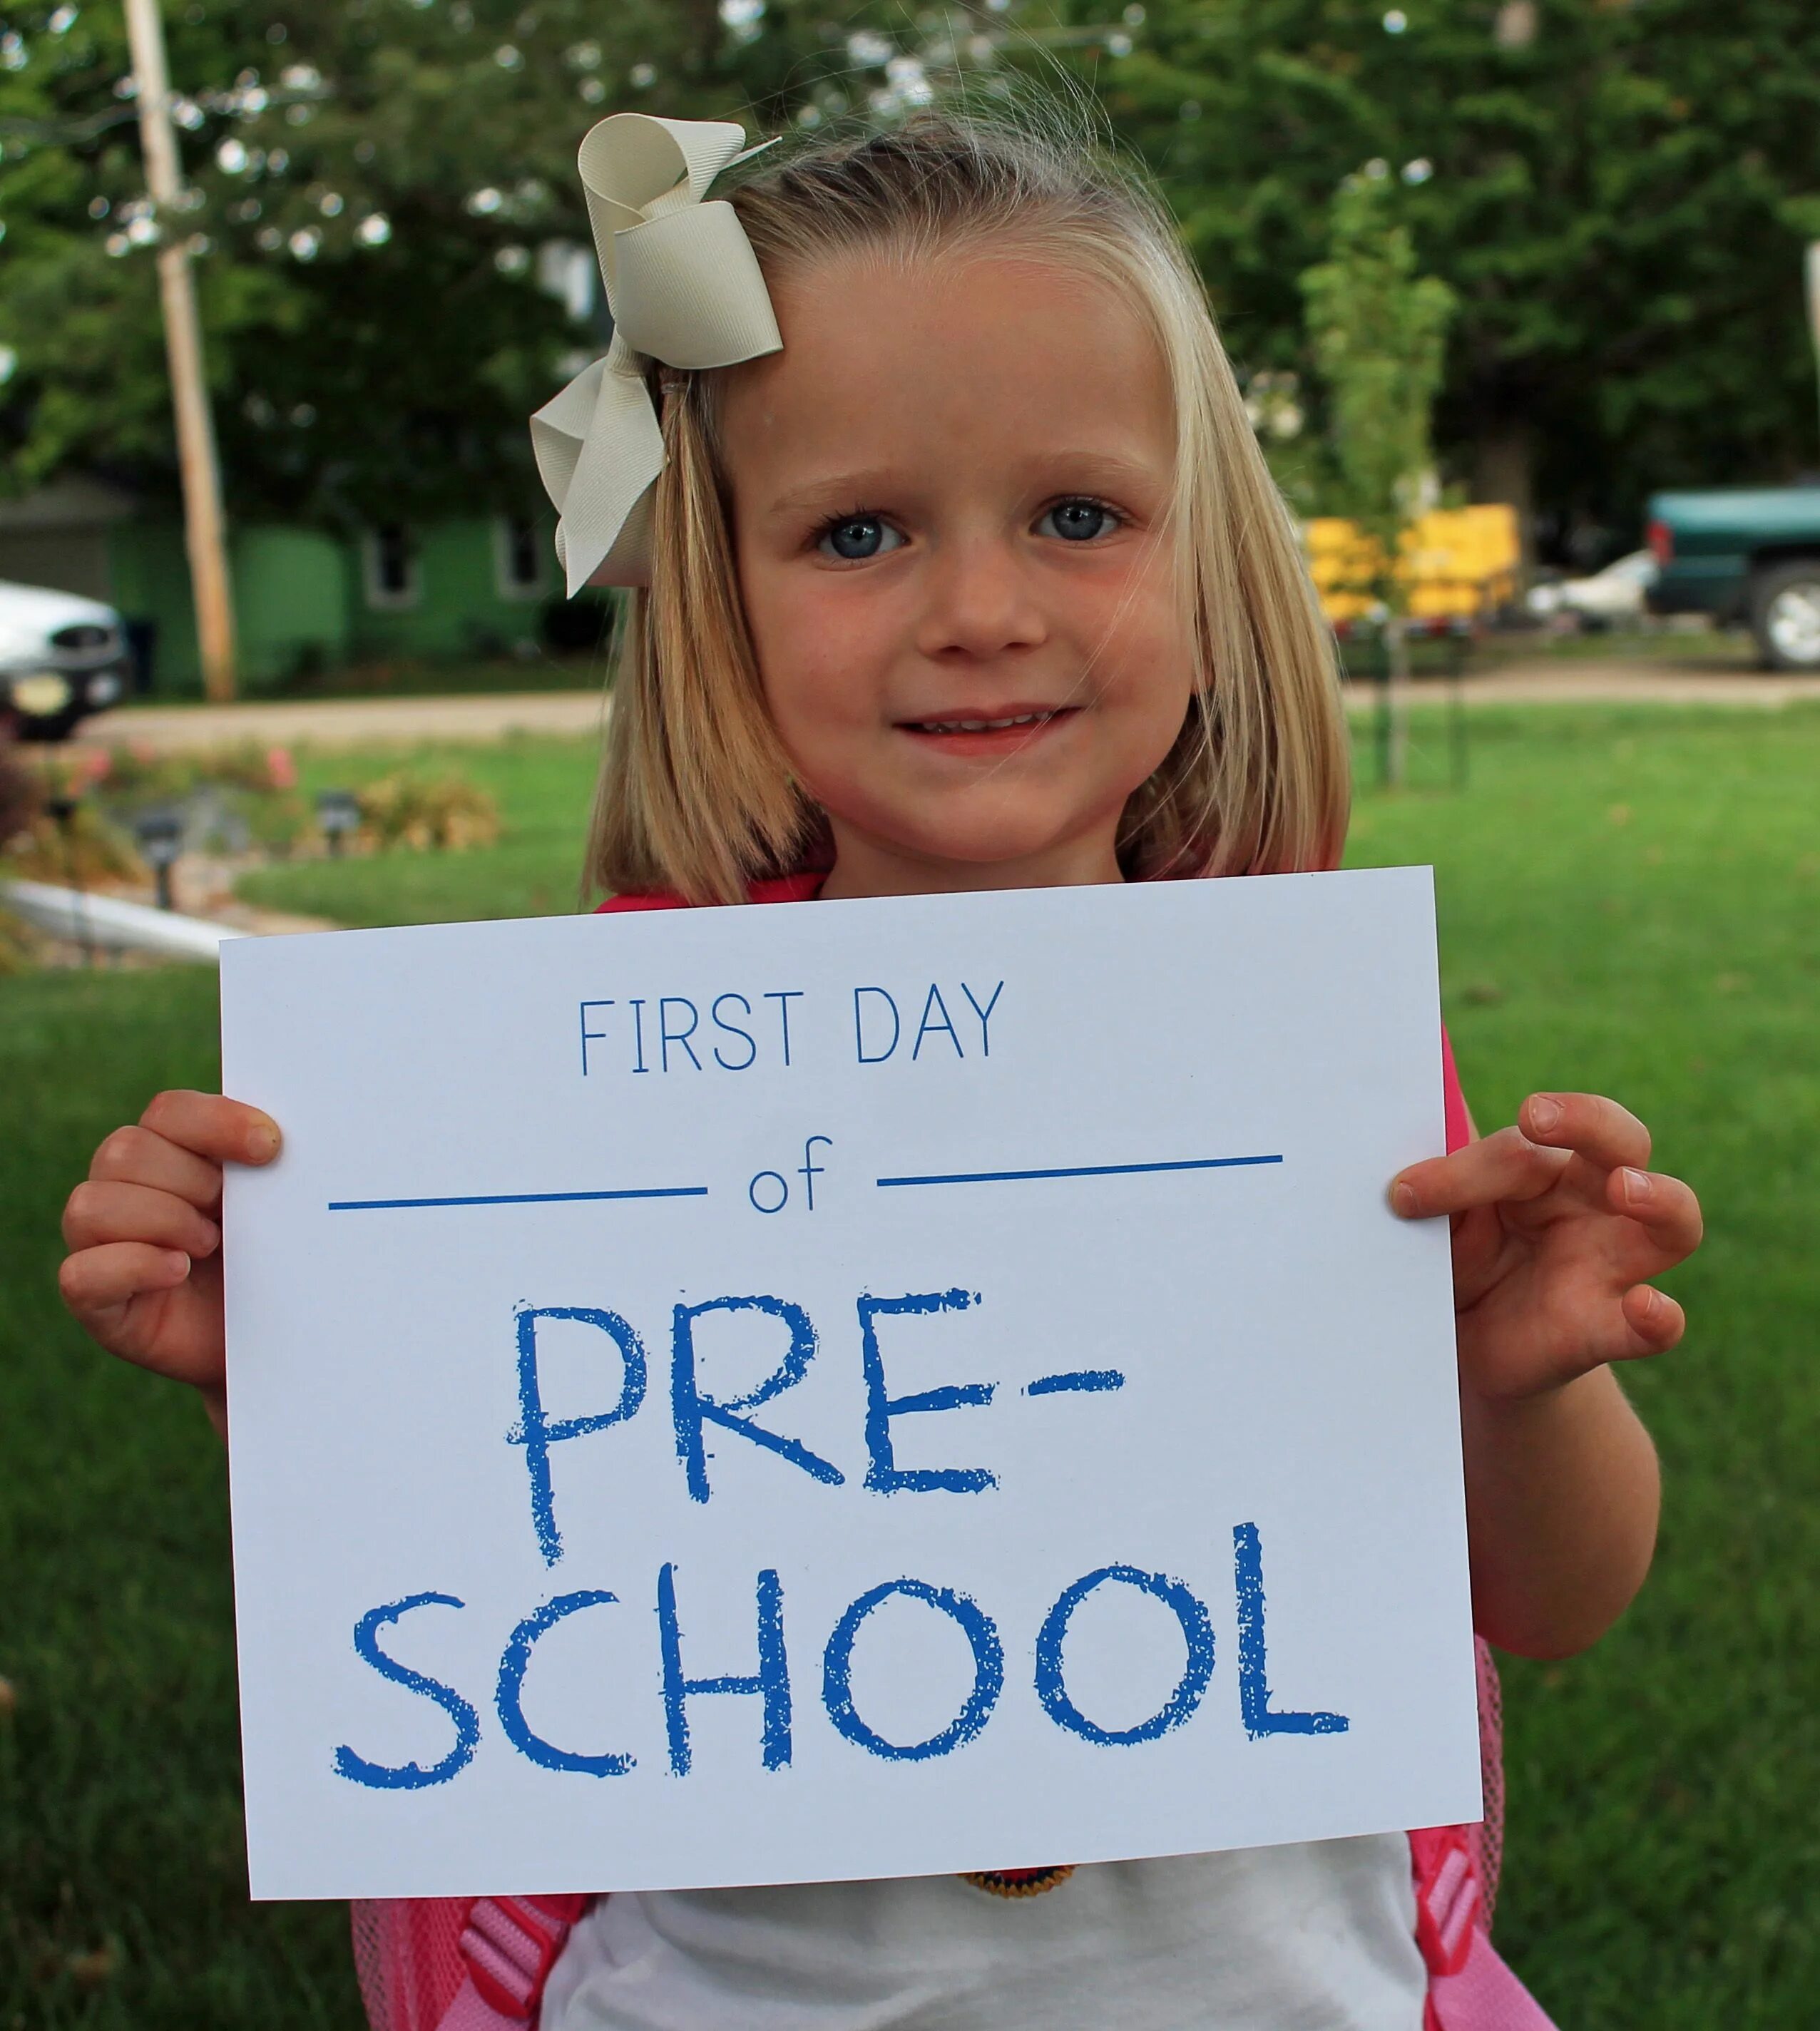 First day school. First Day of School. Школу first Day. My first Day of School. 1st Day of School.